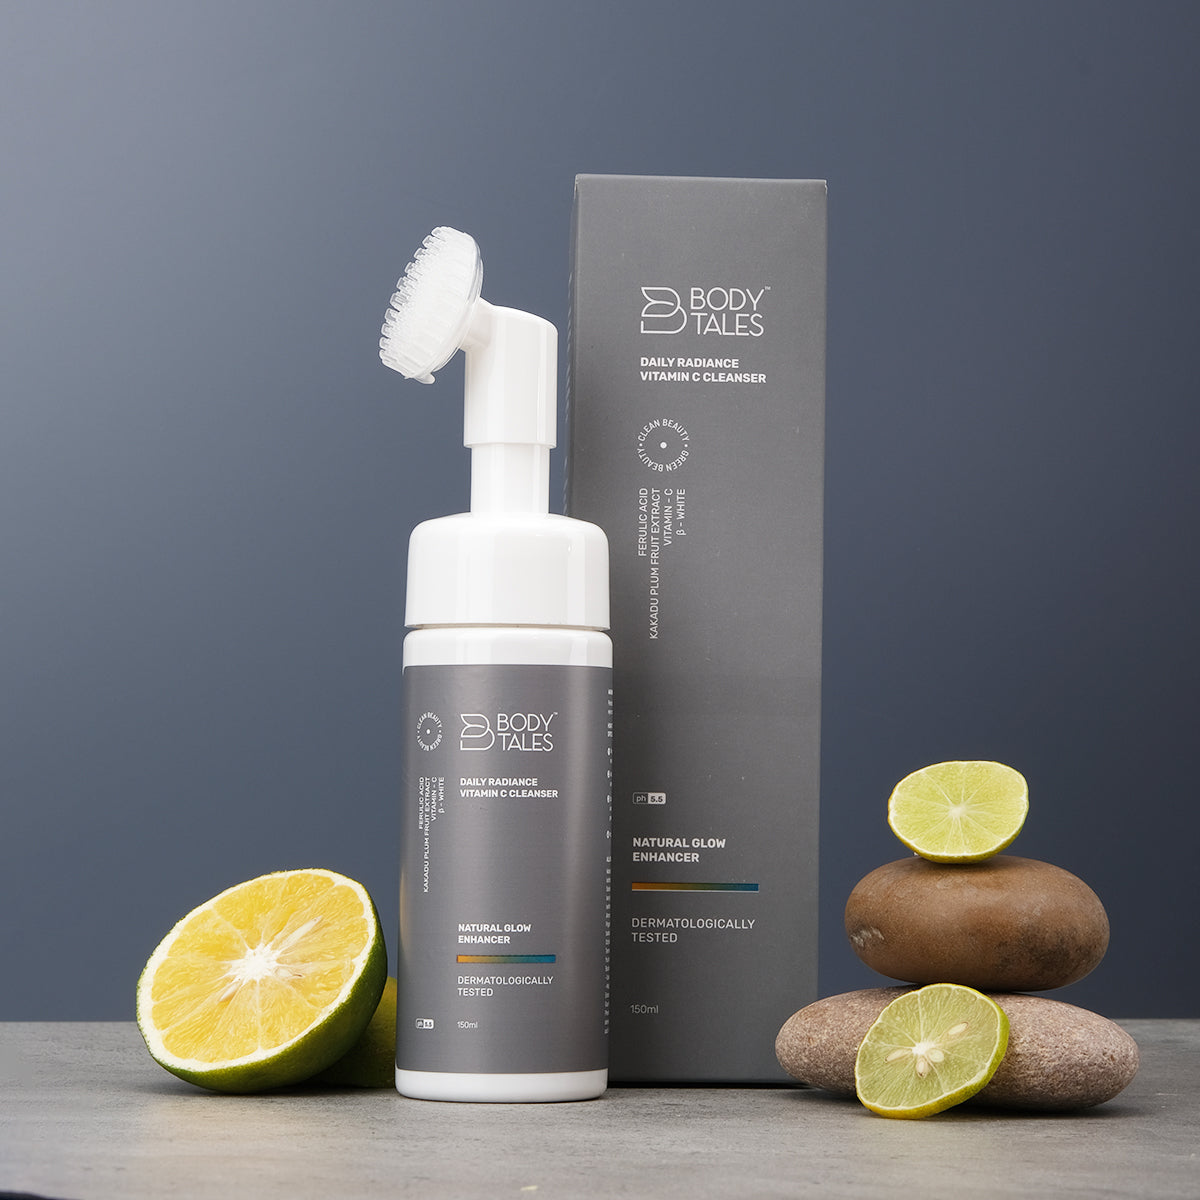 Daily Radiance Vitamin C Cleanser